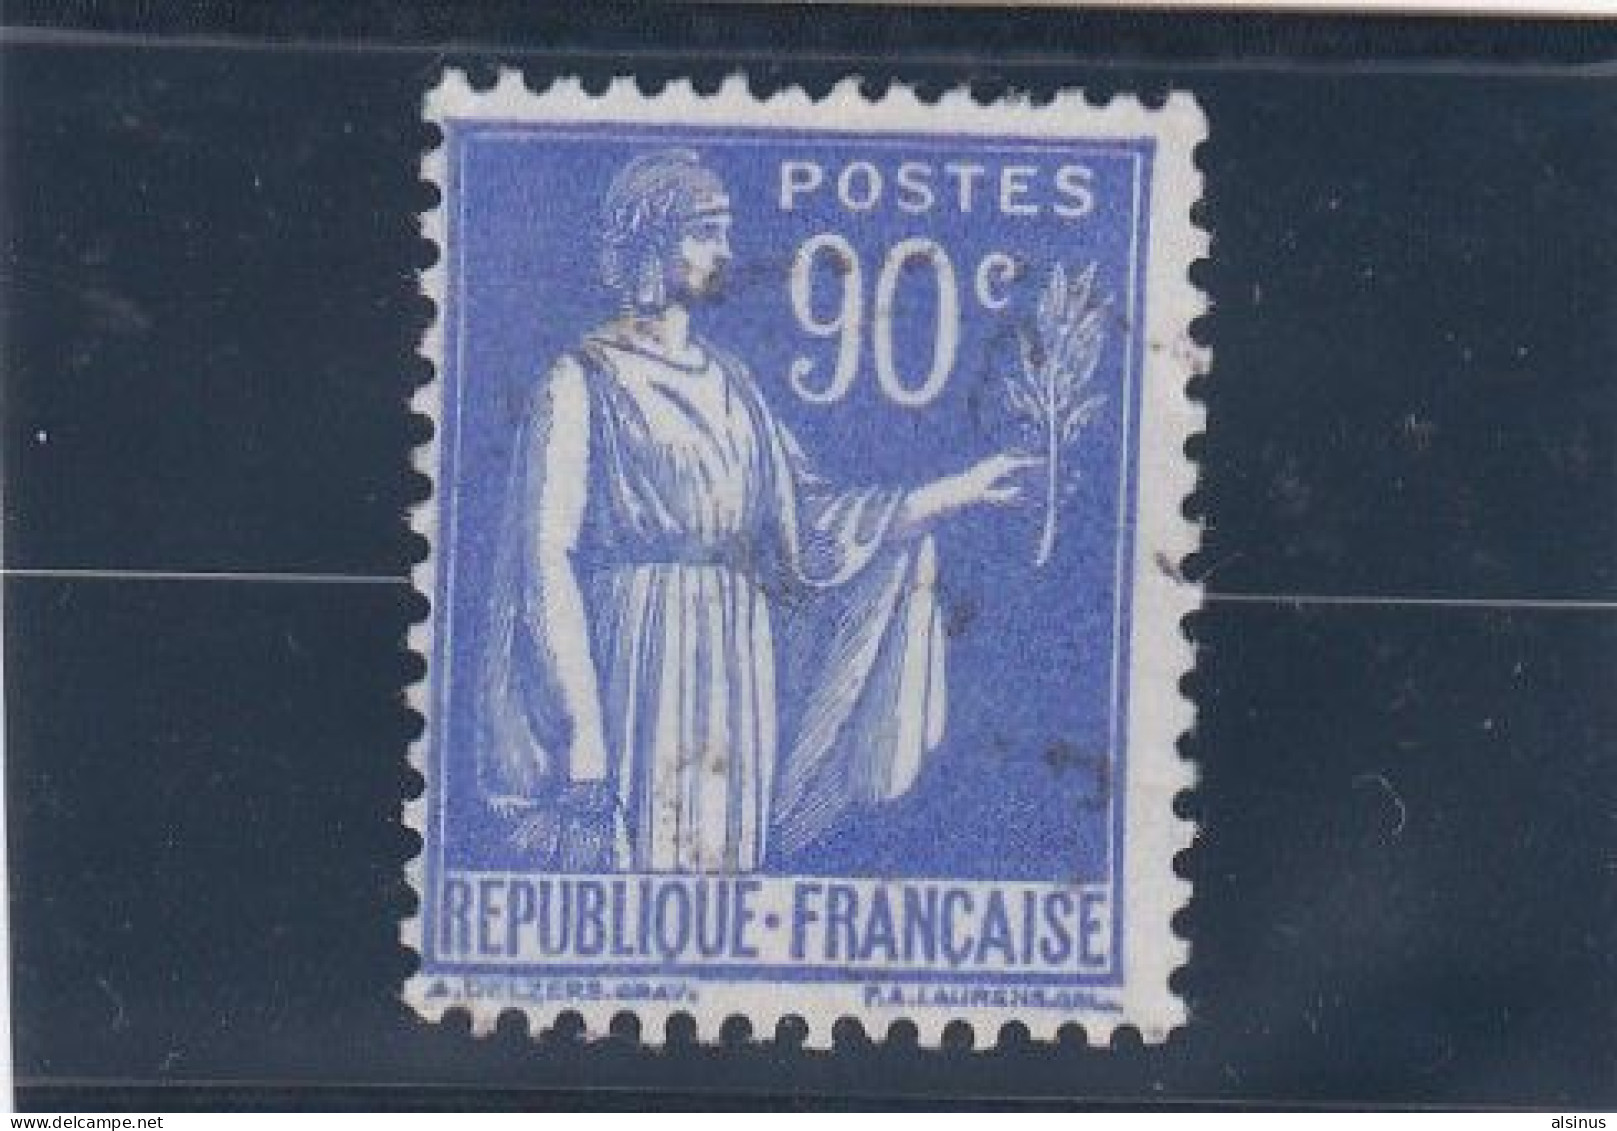 FRANCE - TYPE PAIX - N° 368b - 90 C OUTREMER - TYPE II - NEUF SANS GOMME - 1932-39 Paz